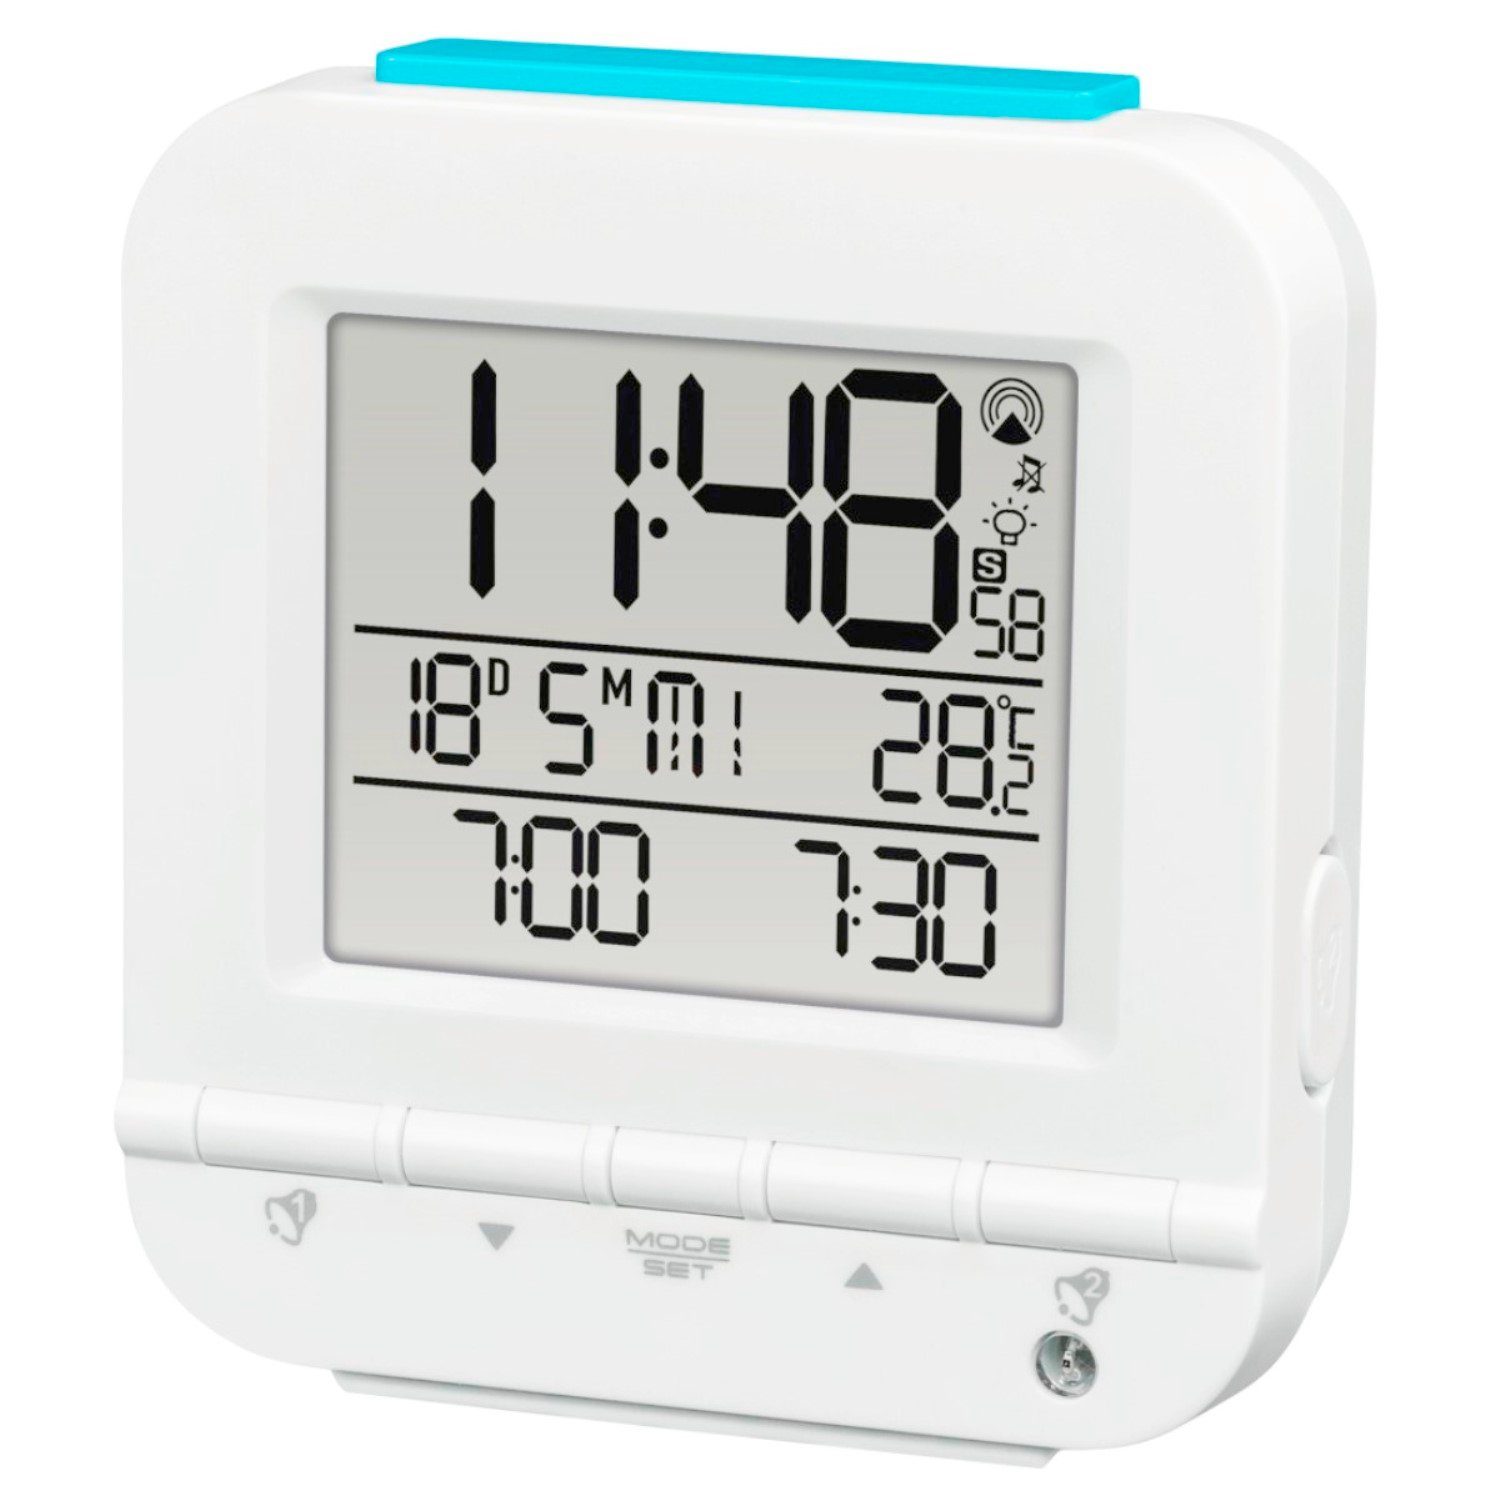 Funk-Projektionswecker Alarmwecker LCD LED Tischuhr Thermometer Snooze 2021 